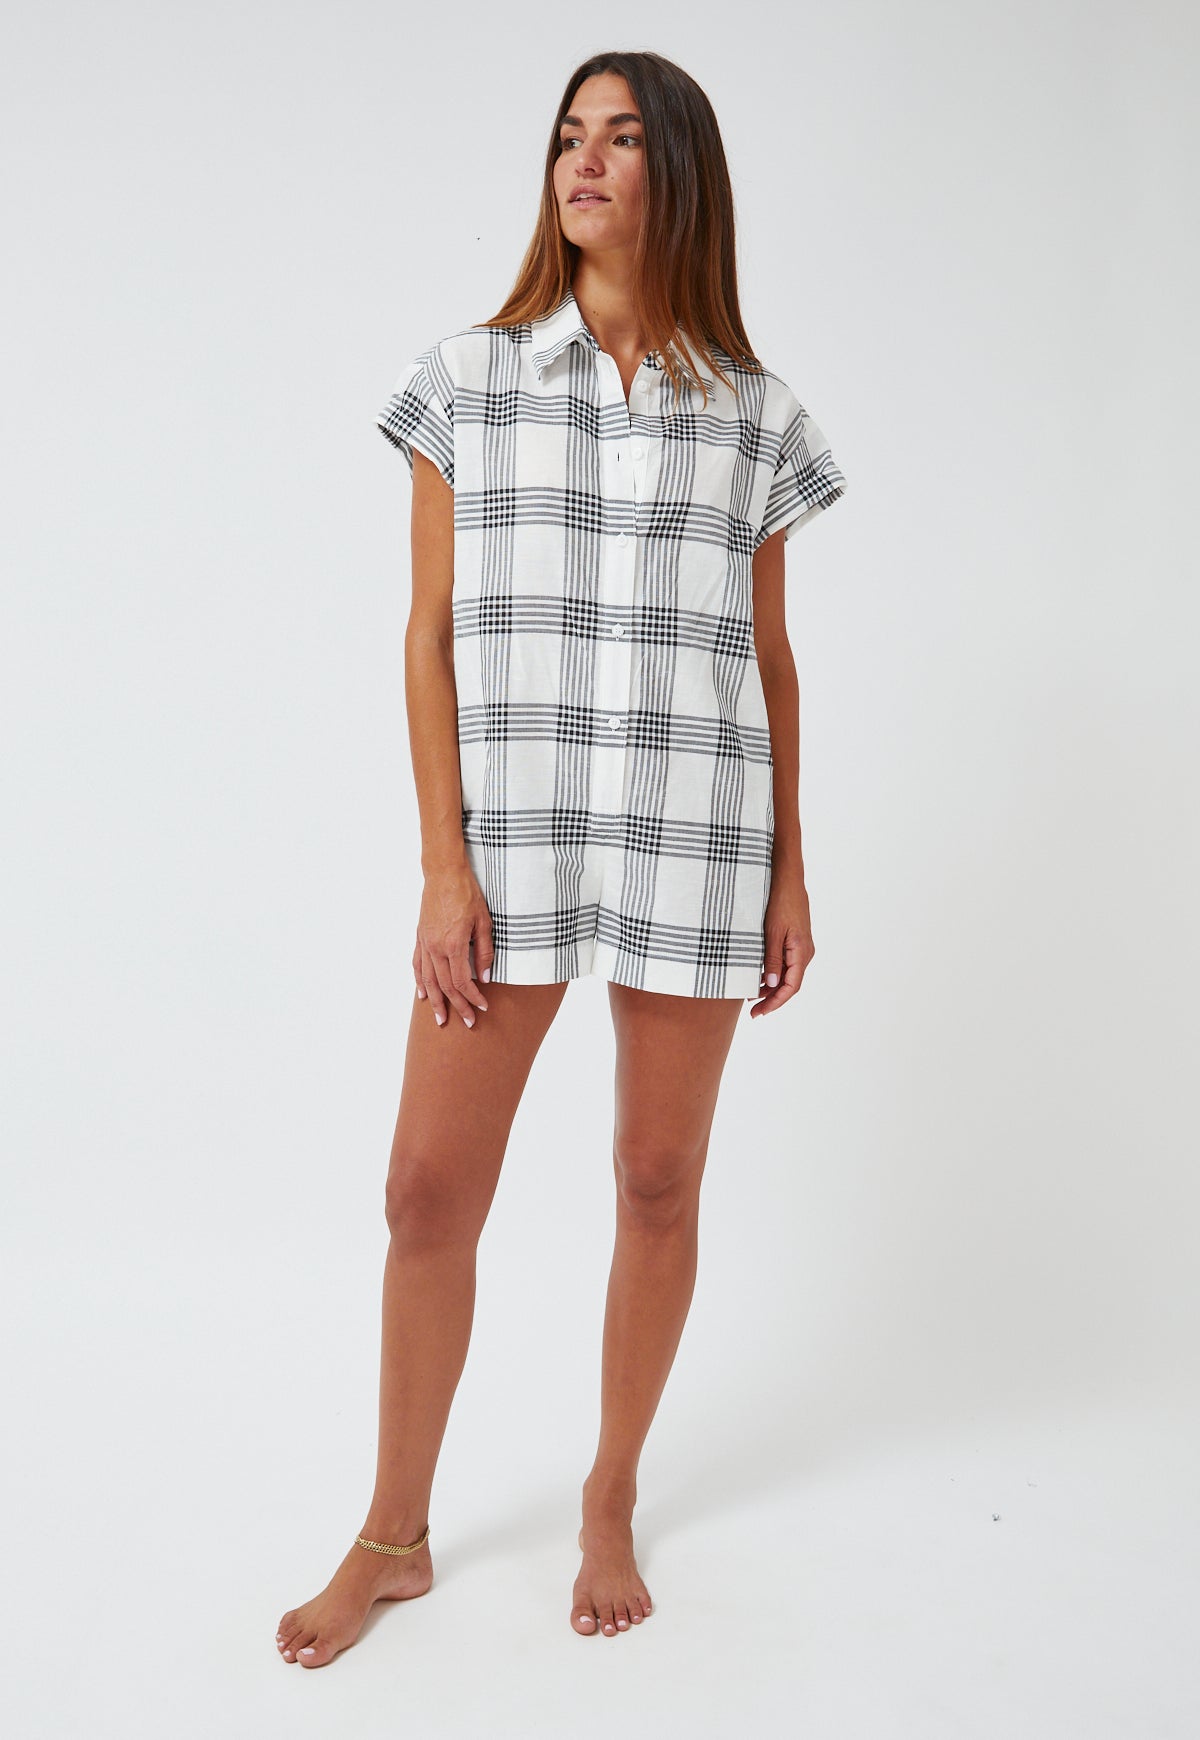 THE TENNIS PLAYSUIT in PLAID COTTON